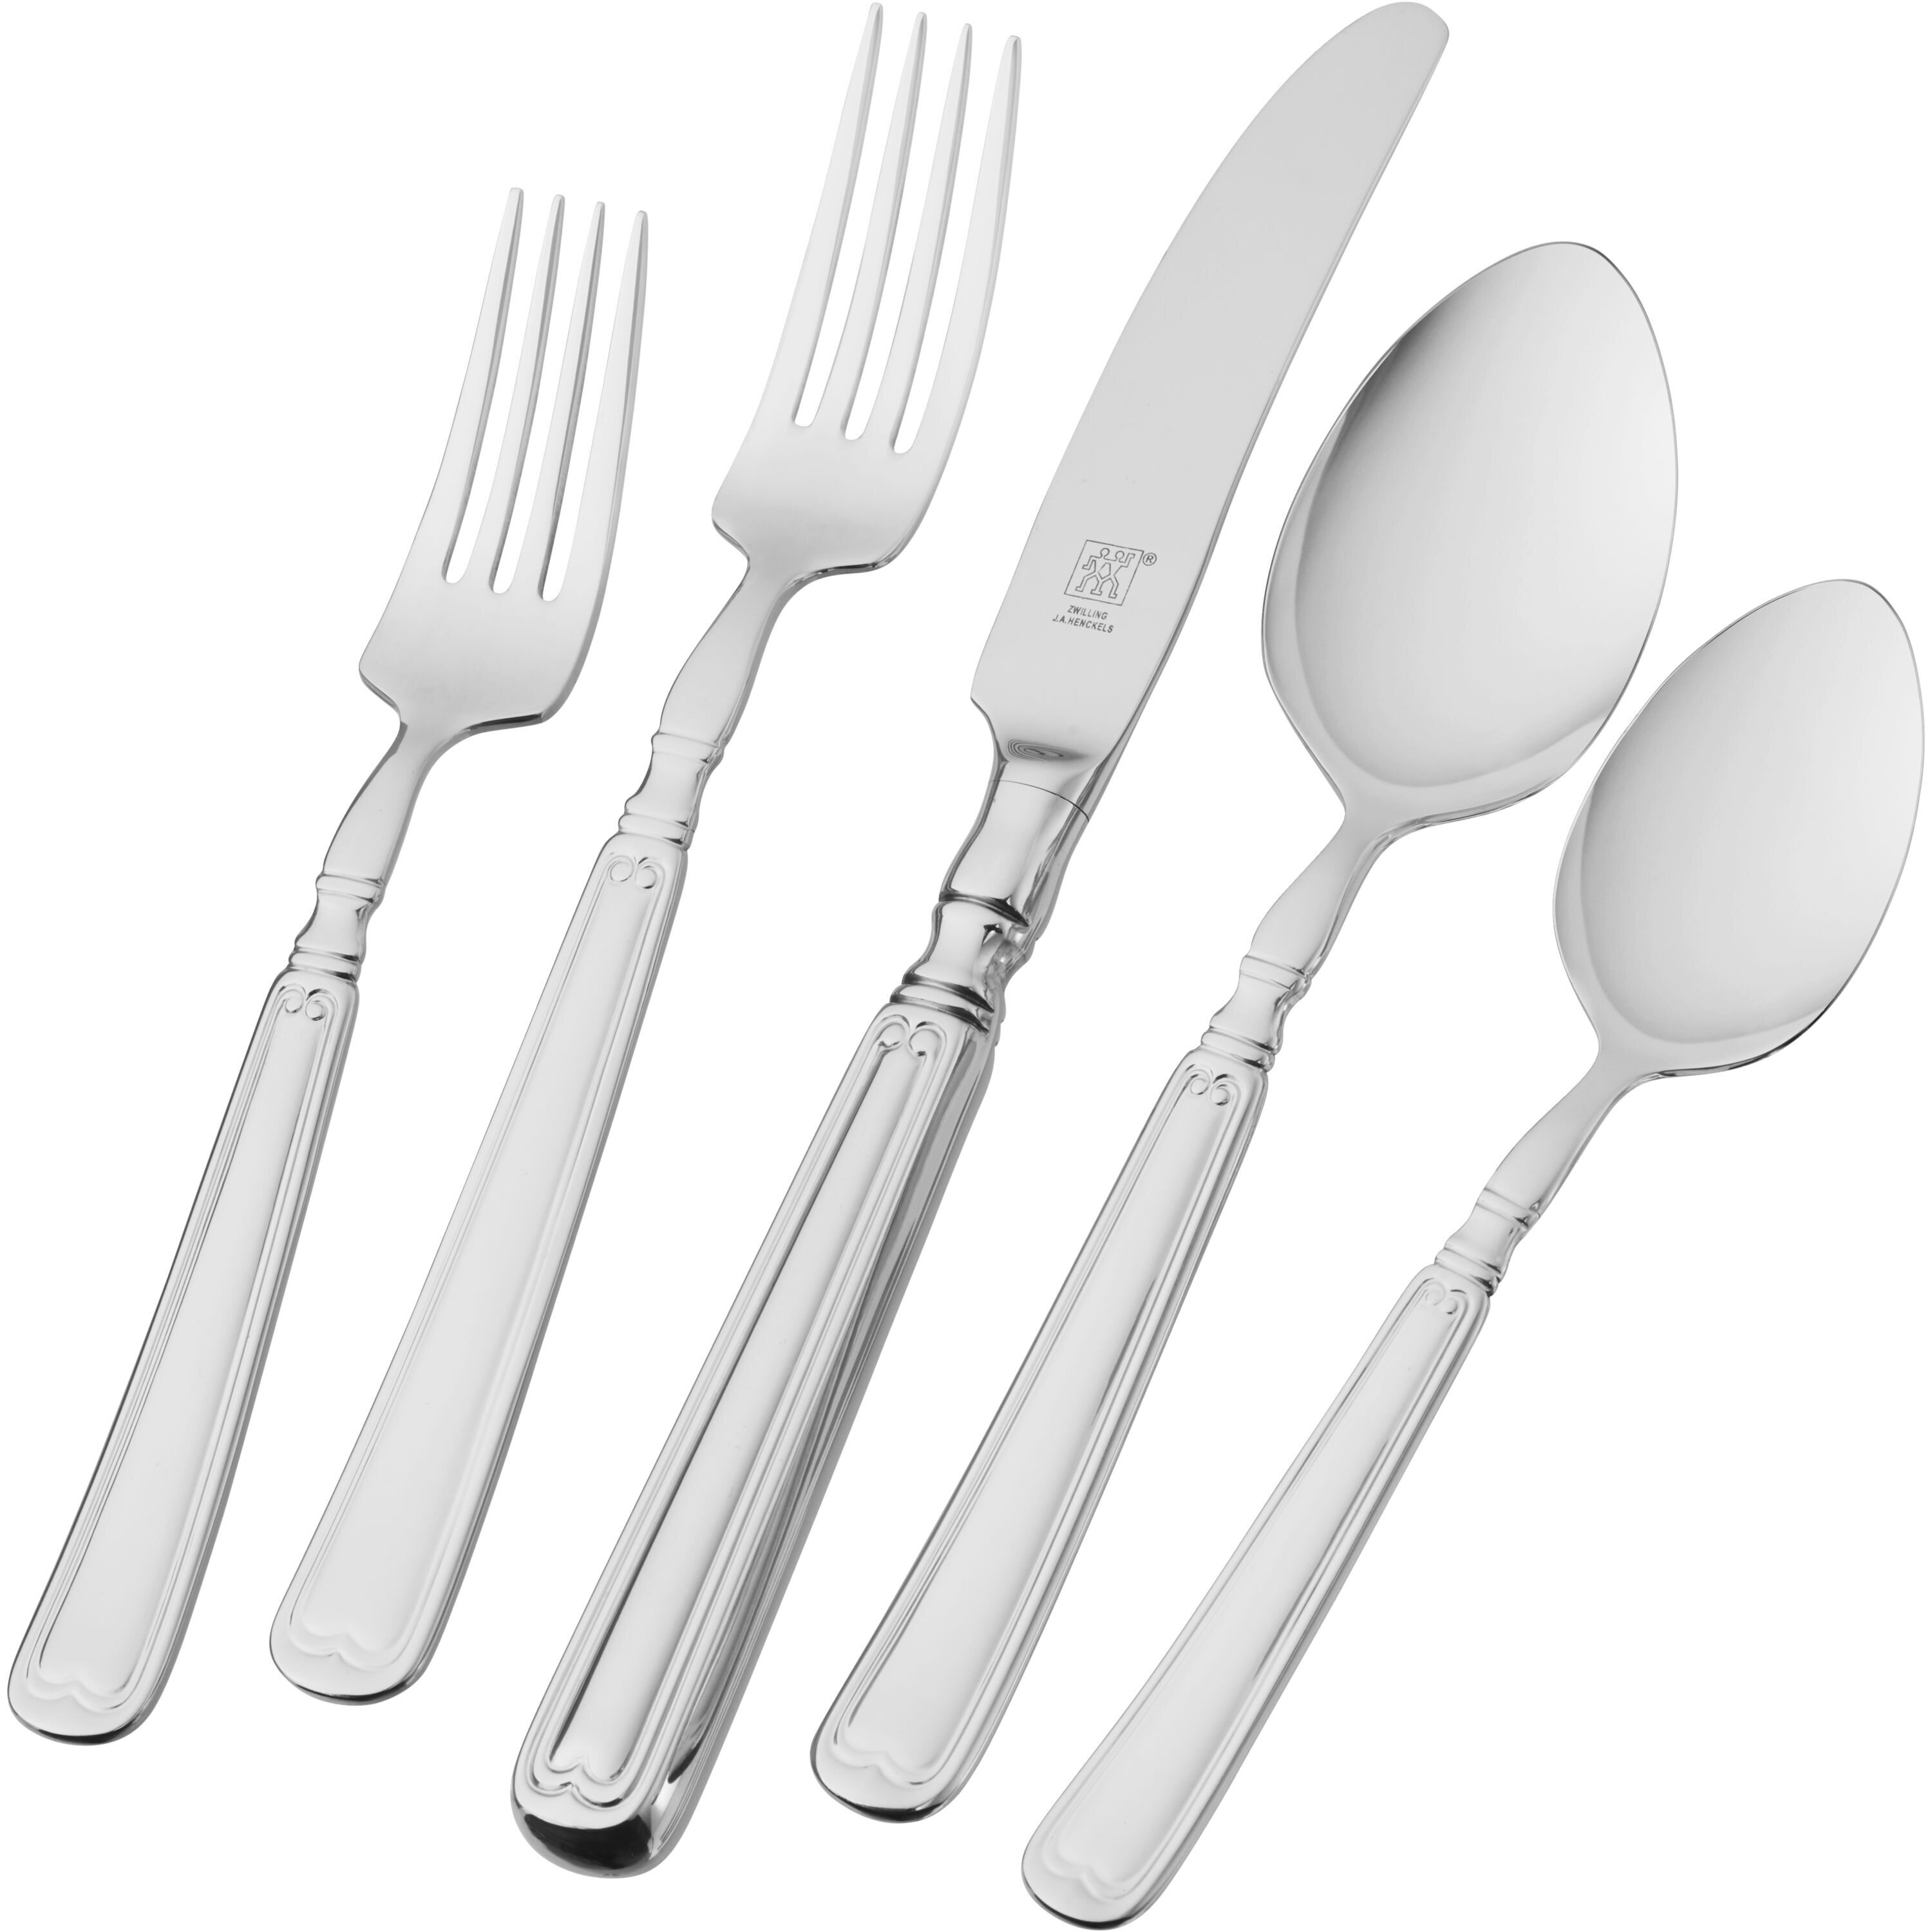 Cutlery Set Lovely Marble pattern Stainless steel Luxury Quality10 20 30 Dinner 